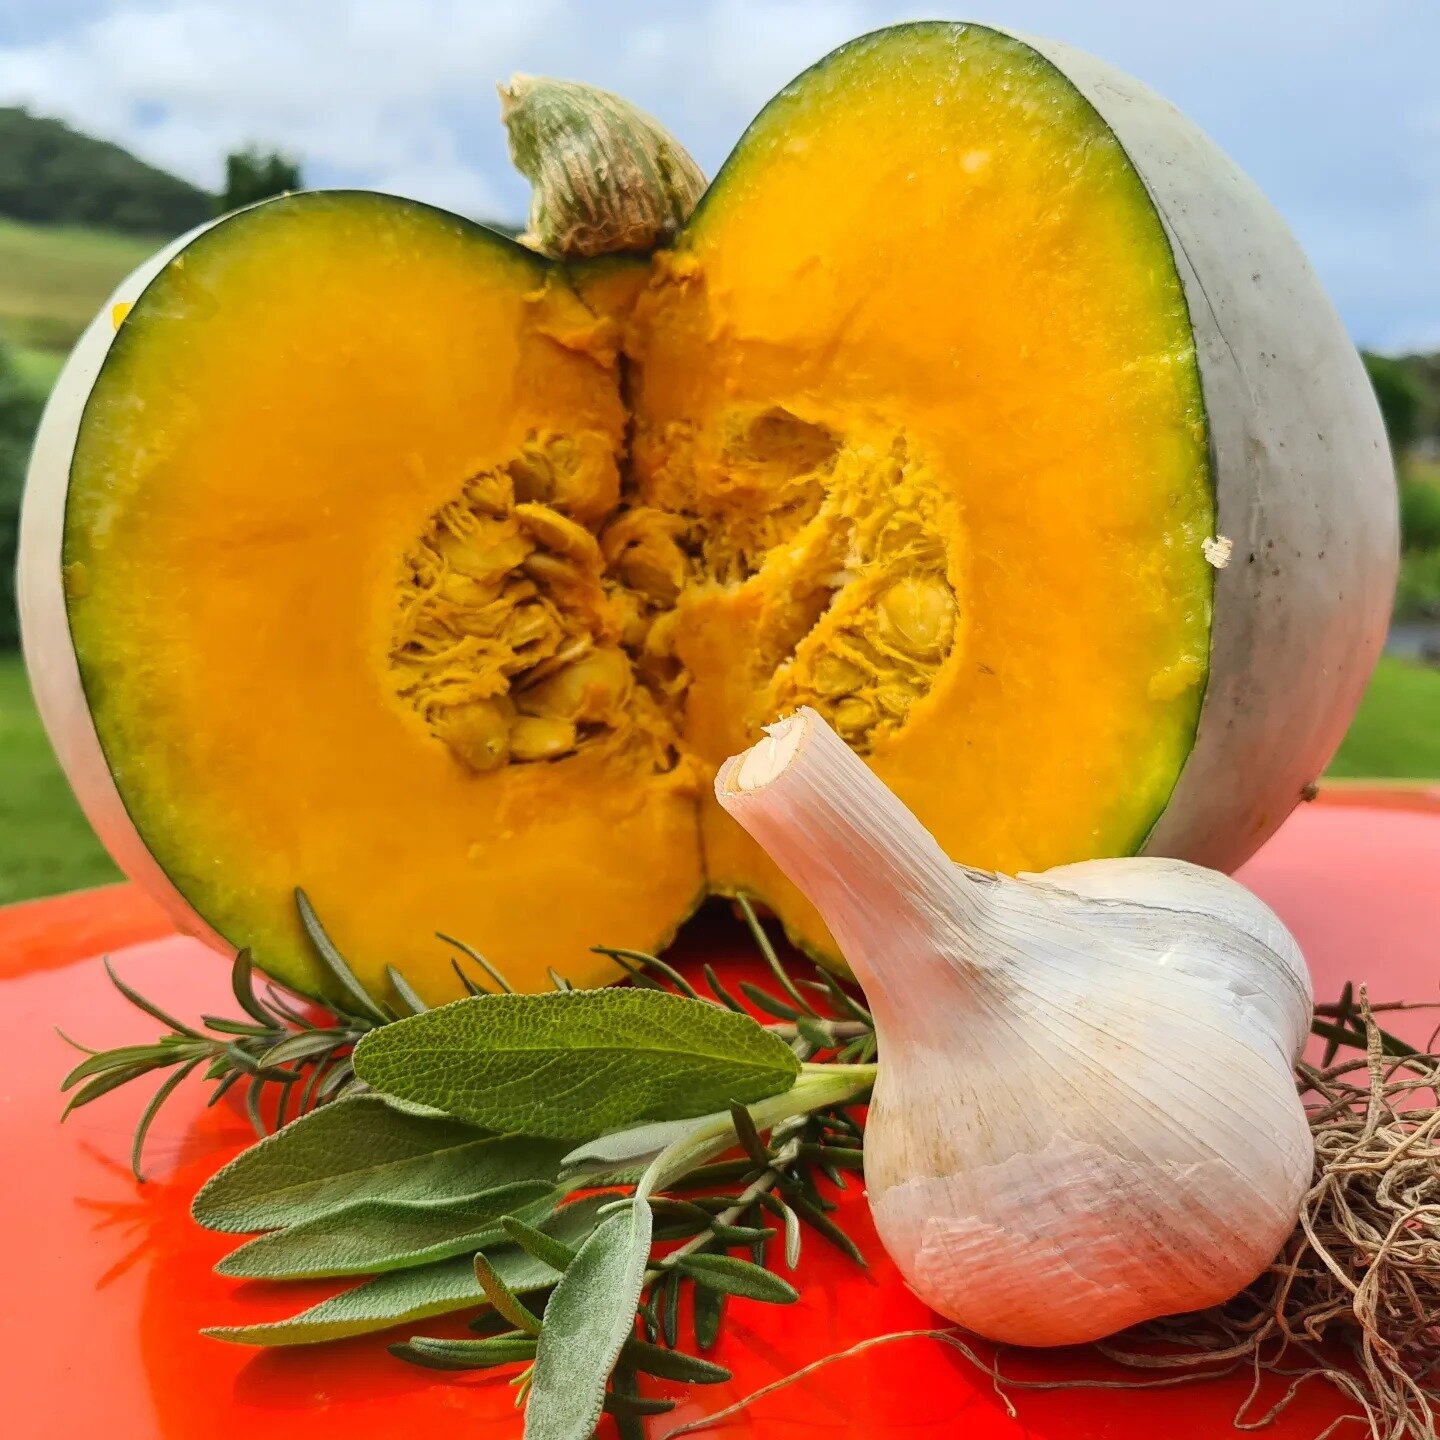 It's pumpkin pickin' time! And goodness, we have alot of them... Grown on organic principles, they're sweet and packed with flavour, come on over and grab yours!

#pumpkin #greypumpkin #paddocktoplate #tastyveggies #seasonalchange #harvesttime #thear